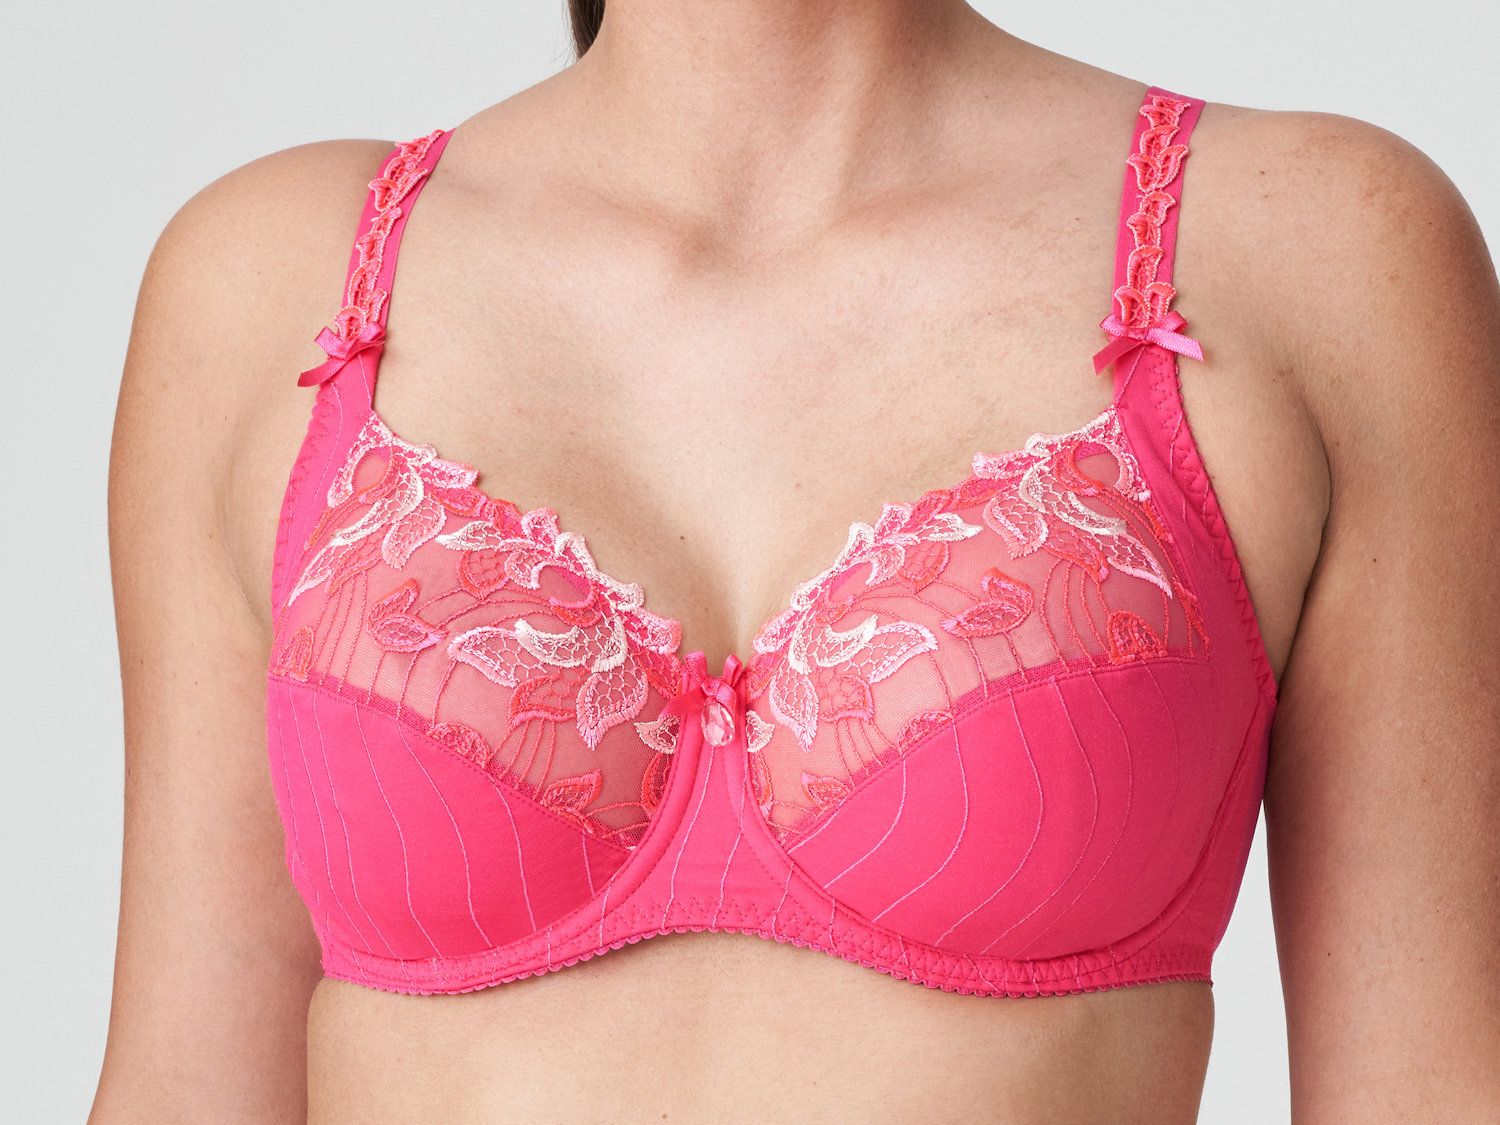 https://www.lumingerie.com/images/products/deauville-0161810-0161811-full-cup-bra-amour-f_orig.jpg